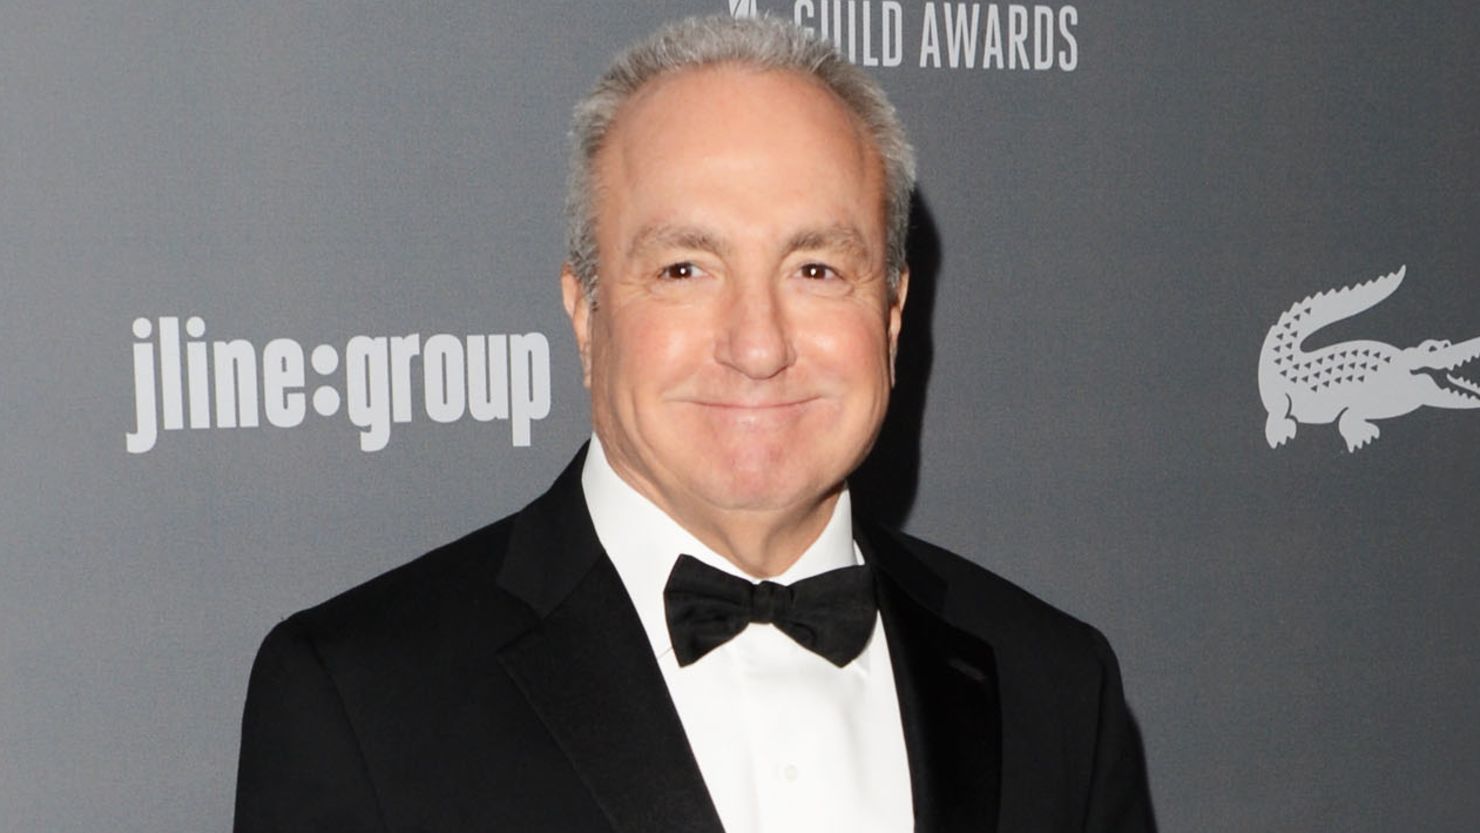 Lorne Michaels attends the 15th Annual Costume Designers Guild Awards  in February 2013 in Beverly Hills, California. 